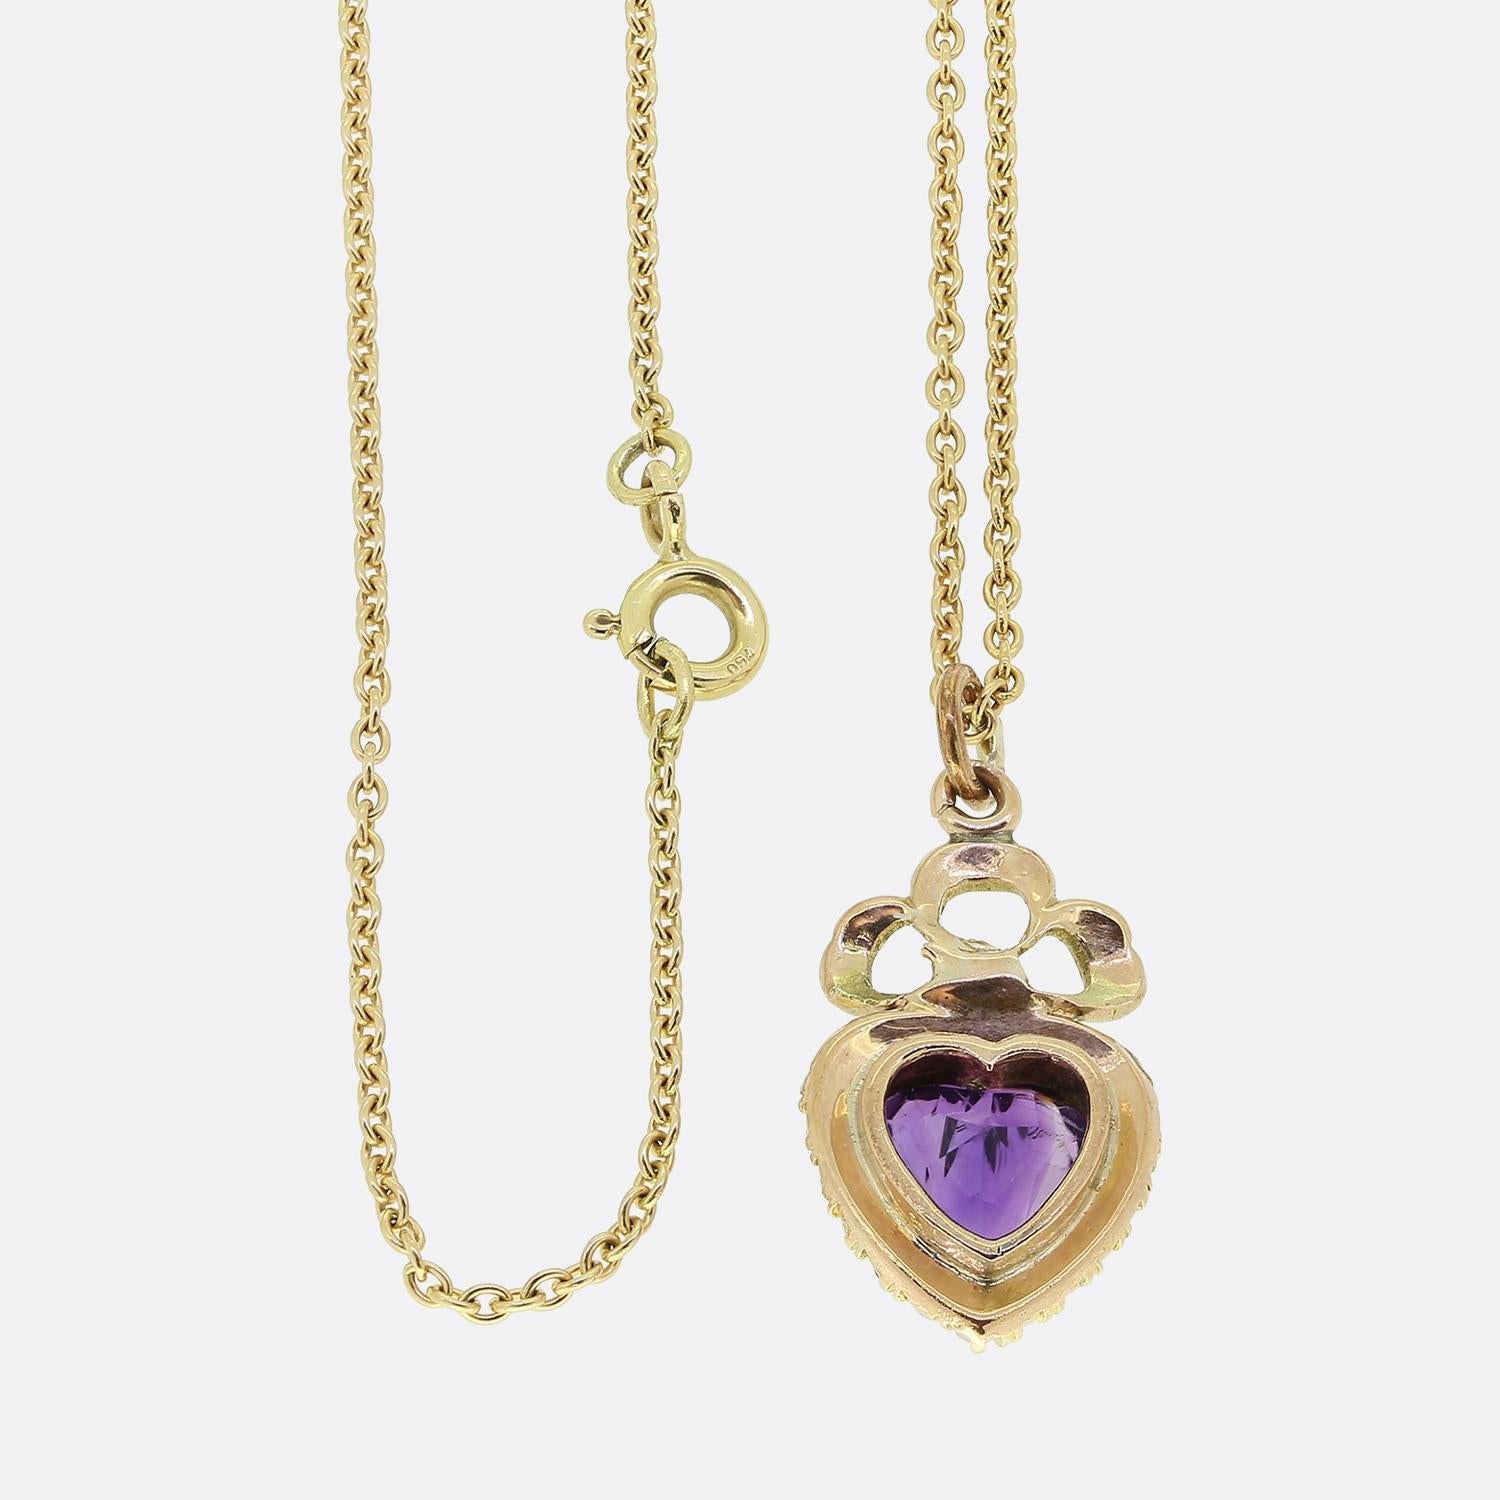 Here we have a stunning amethyst and pearl set pendant necklace. This antique pendant showcases an expertly crafted heart shaped amethyst possessing a rich purple colour tone. This centralised gemstone sits slightly risen and is framed by a single